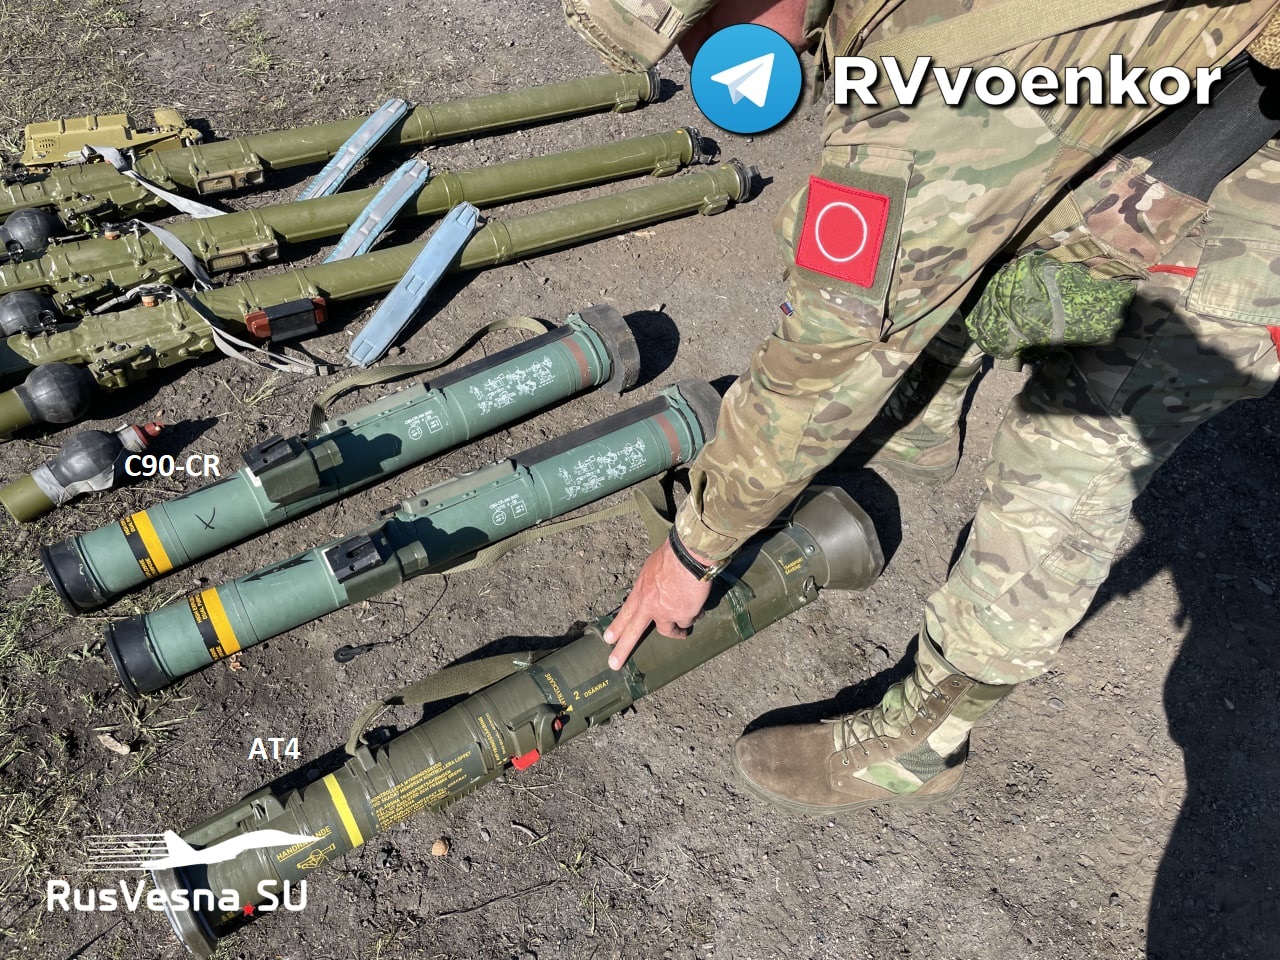 Russian Army Seized Loads Of Western-Made Weapons From Kiev Forces In Donbass (Photos)